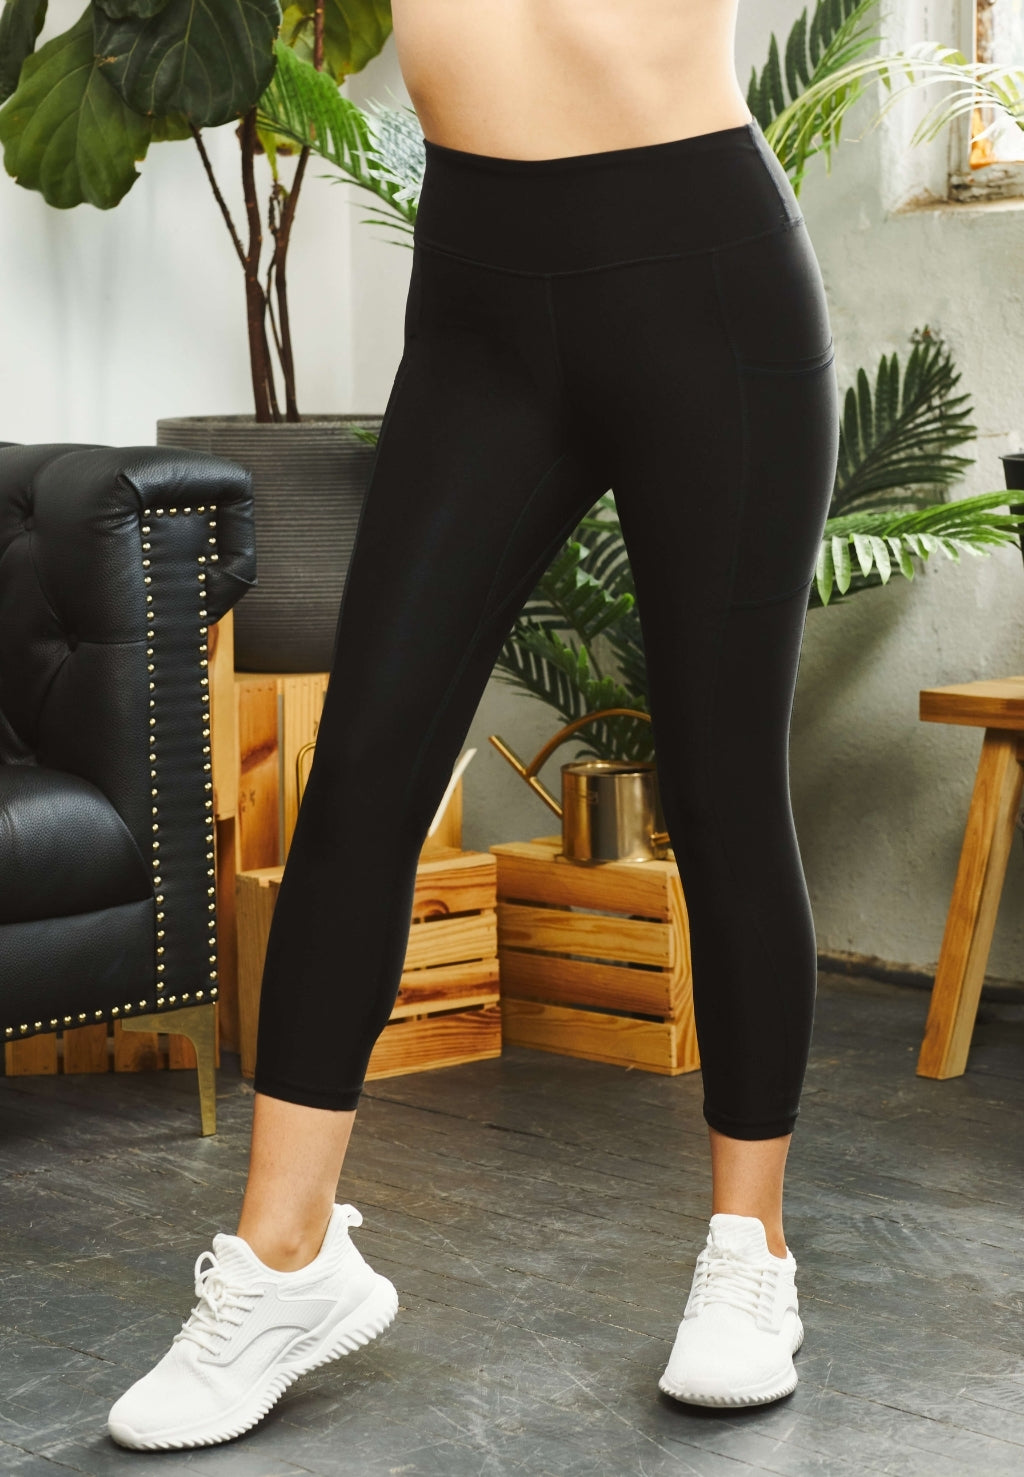 Ultra High Waisted Legging with Cod-String - Polymorphe